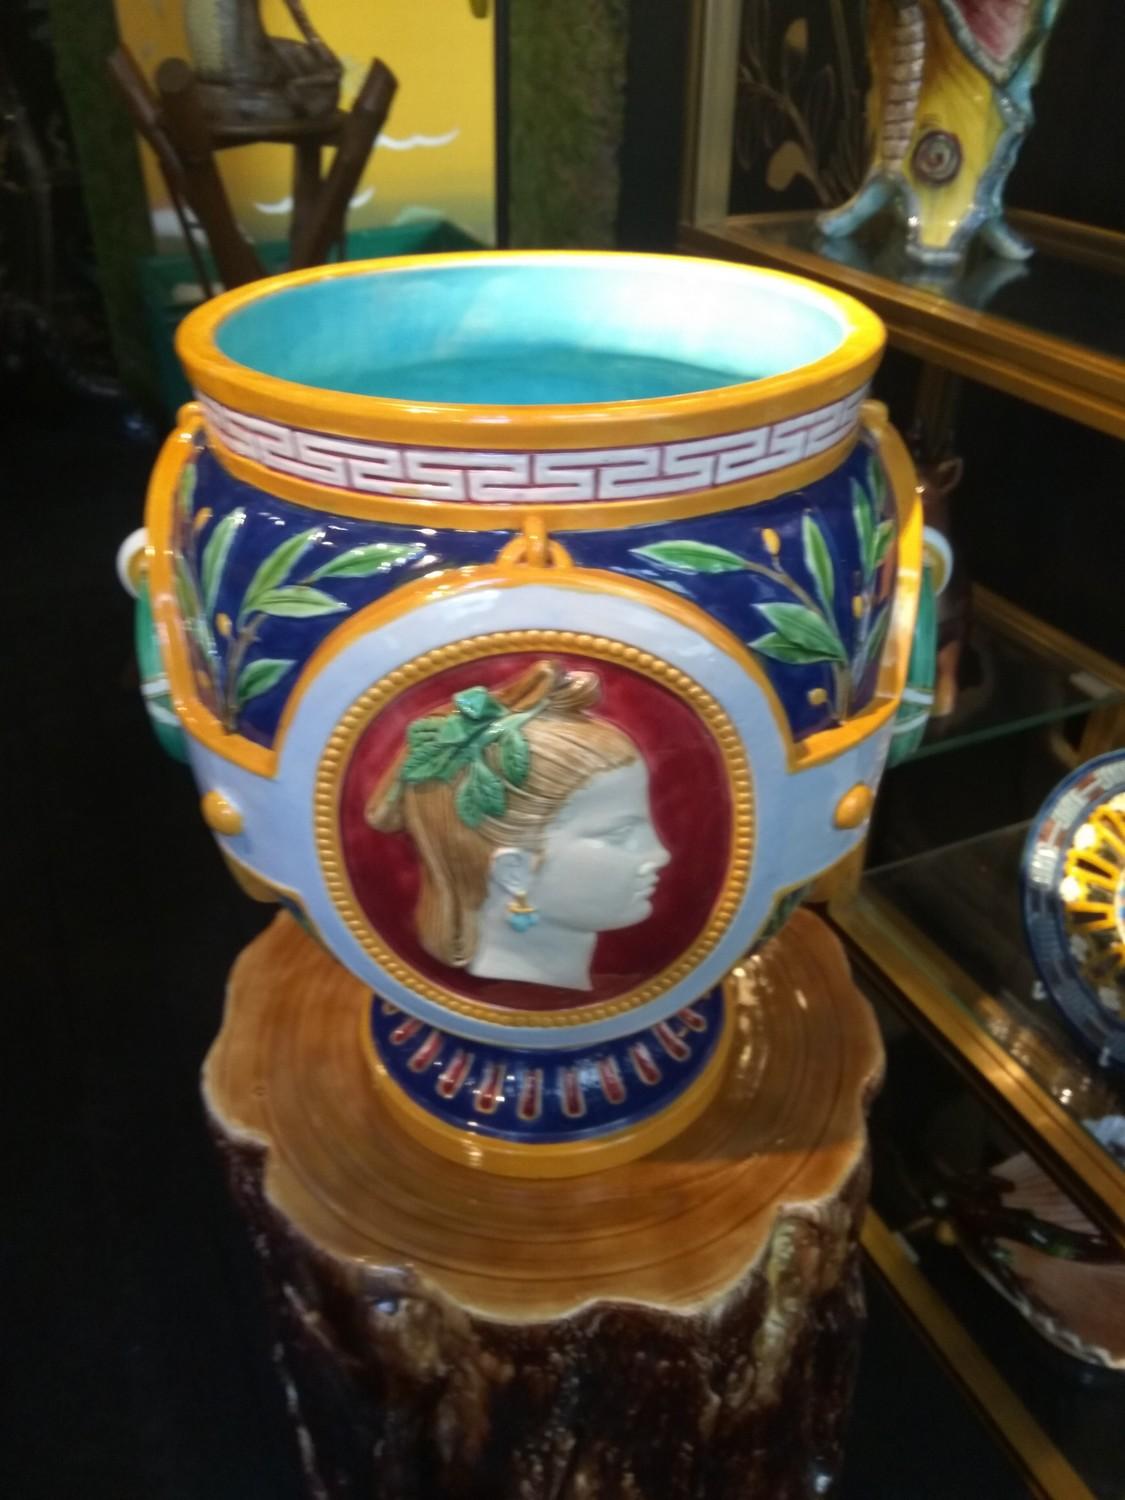 This brightly colored Minton neoclassical vase testifies to the exceptional creative spirit that reigned at the Minton factory during the second half of the 19th century. This planter alone brings together many of the characteristics of